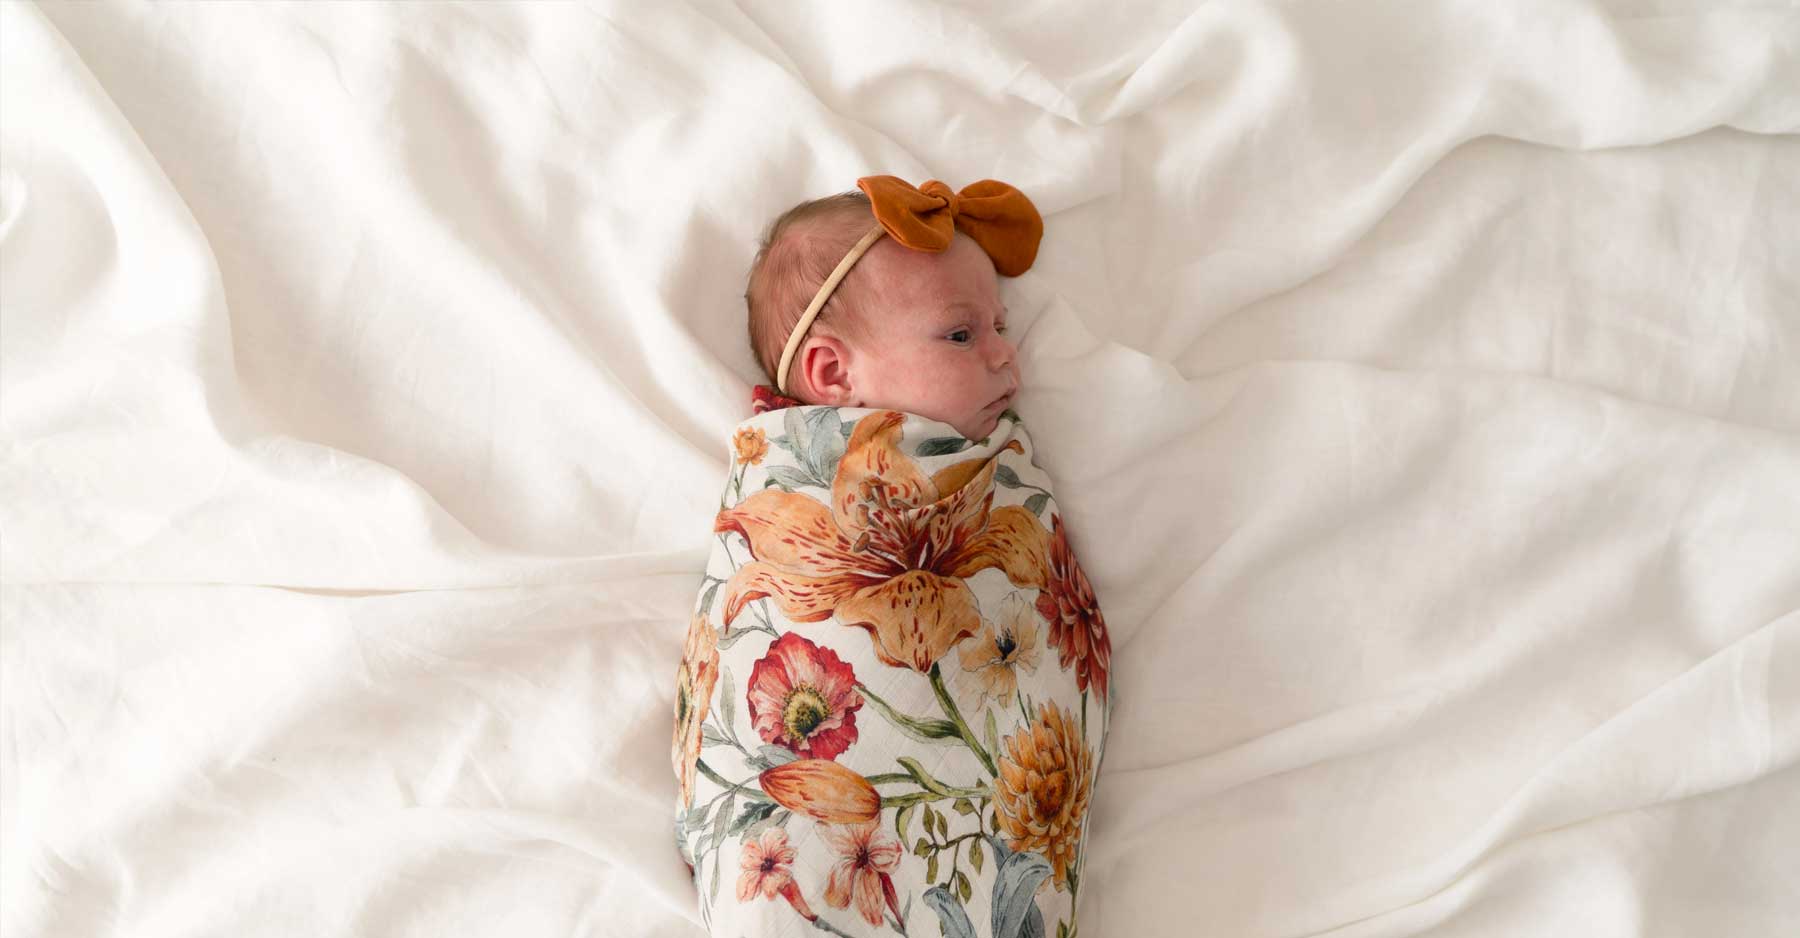 Newborn baby boy swaddled in fabric sleeping and holding his hands close to cheeks.